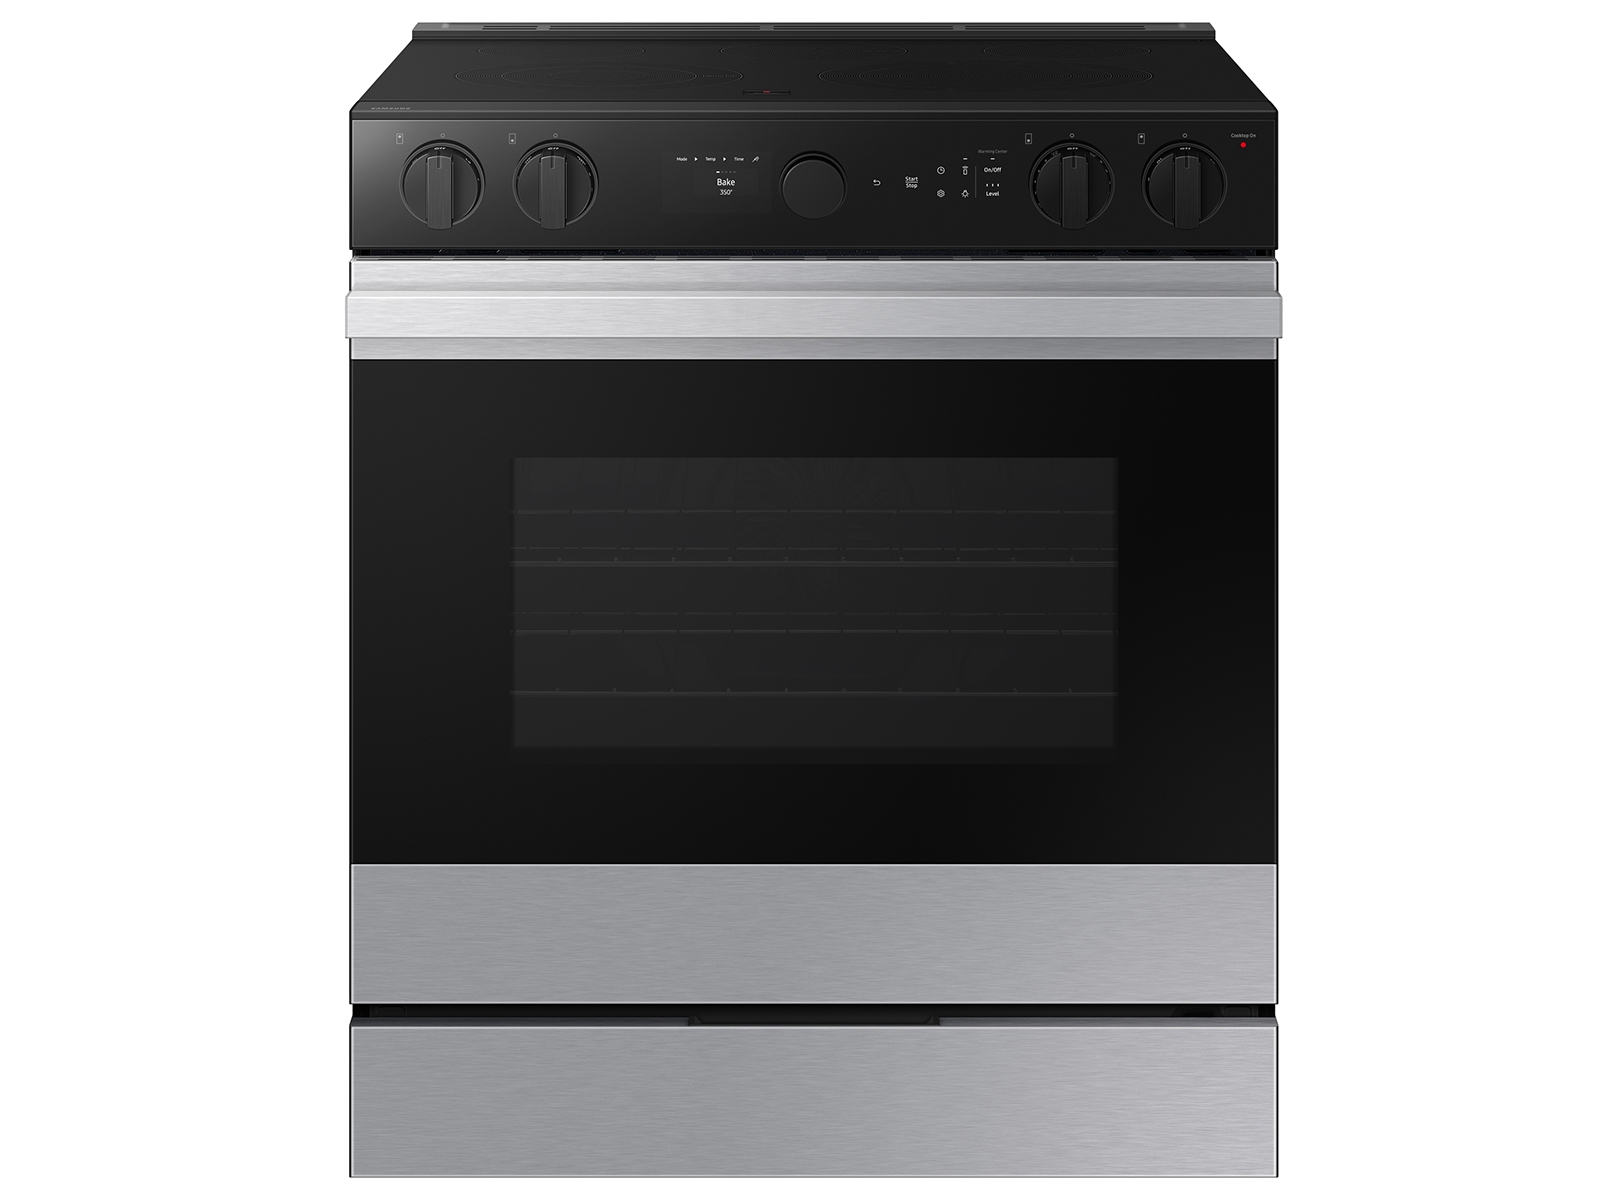 Bespoke Smart Slide-In Electric Range with Smart Oven Camera & Illuminated Precision Knobs